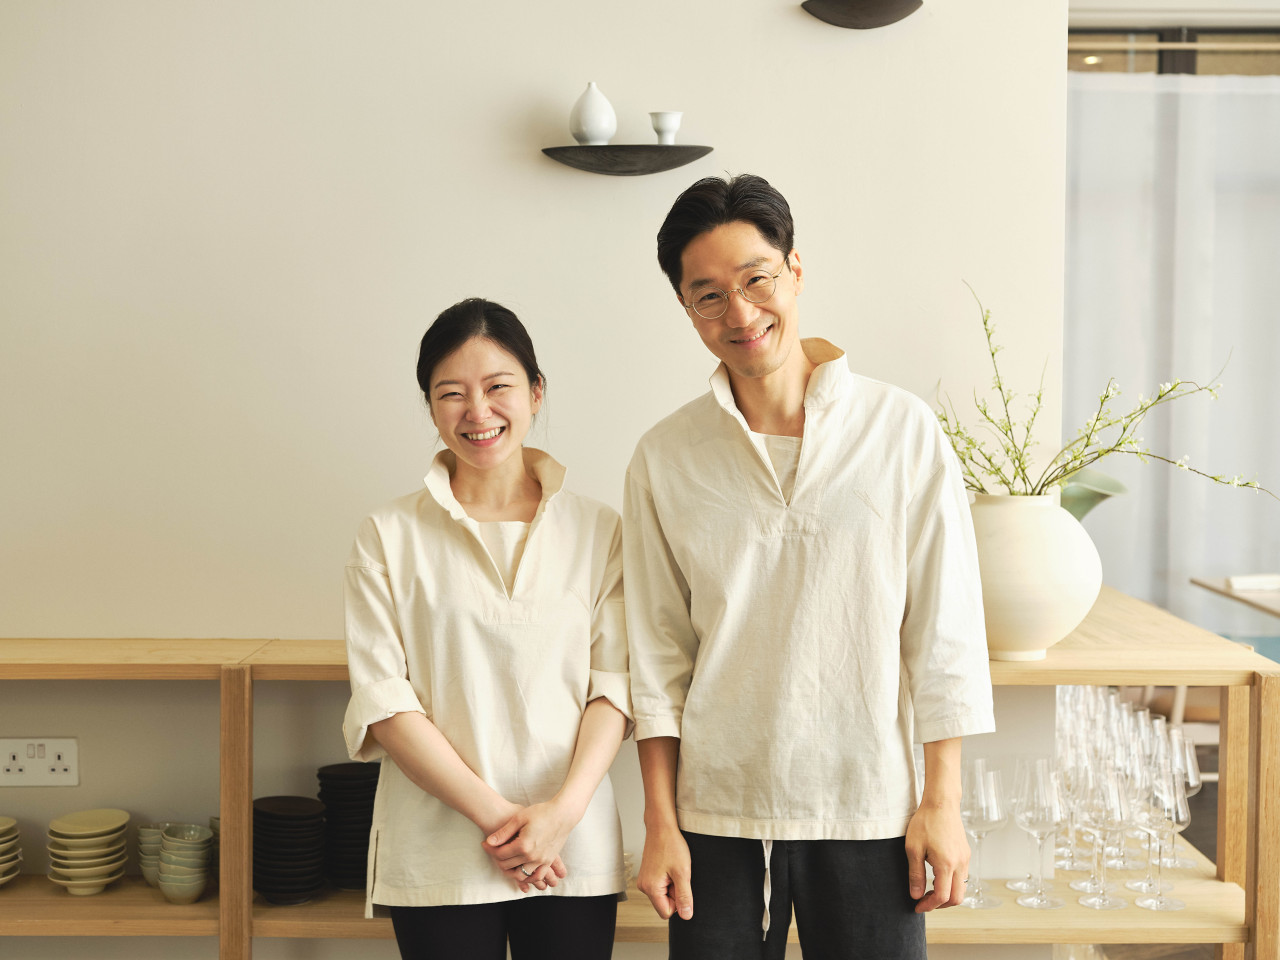 Chef Park Woong-chul (right) and pastry chef Ki Bo-mee, owners of the restaurant Sollip, based in London (Sollip)